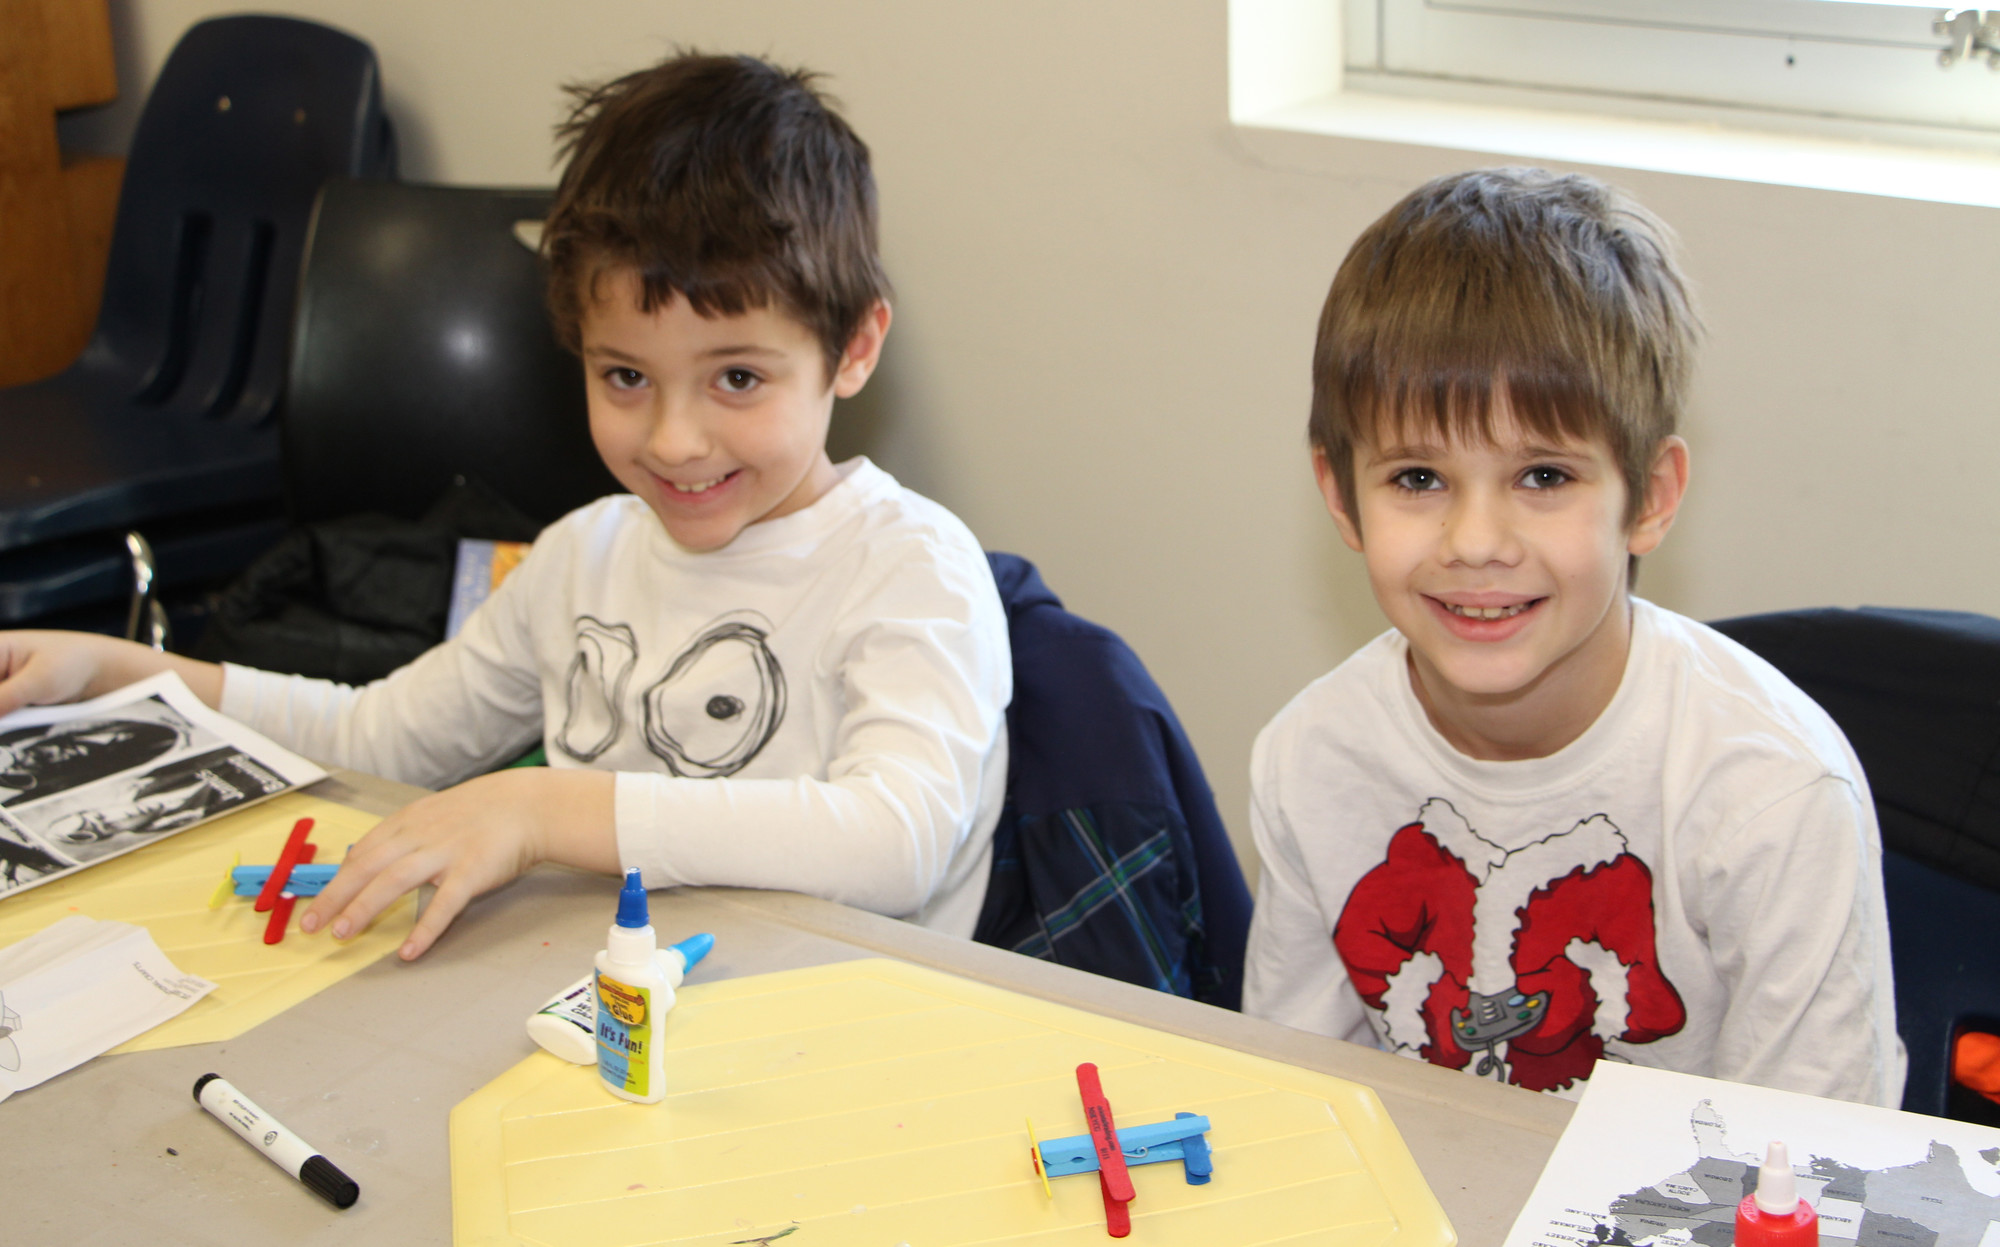 Brothers, Frederick Siena Horowitz, left, and Giovanni, 7, glued their planes together during the craft portion of the event.